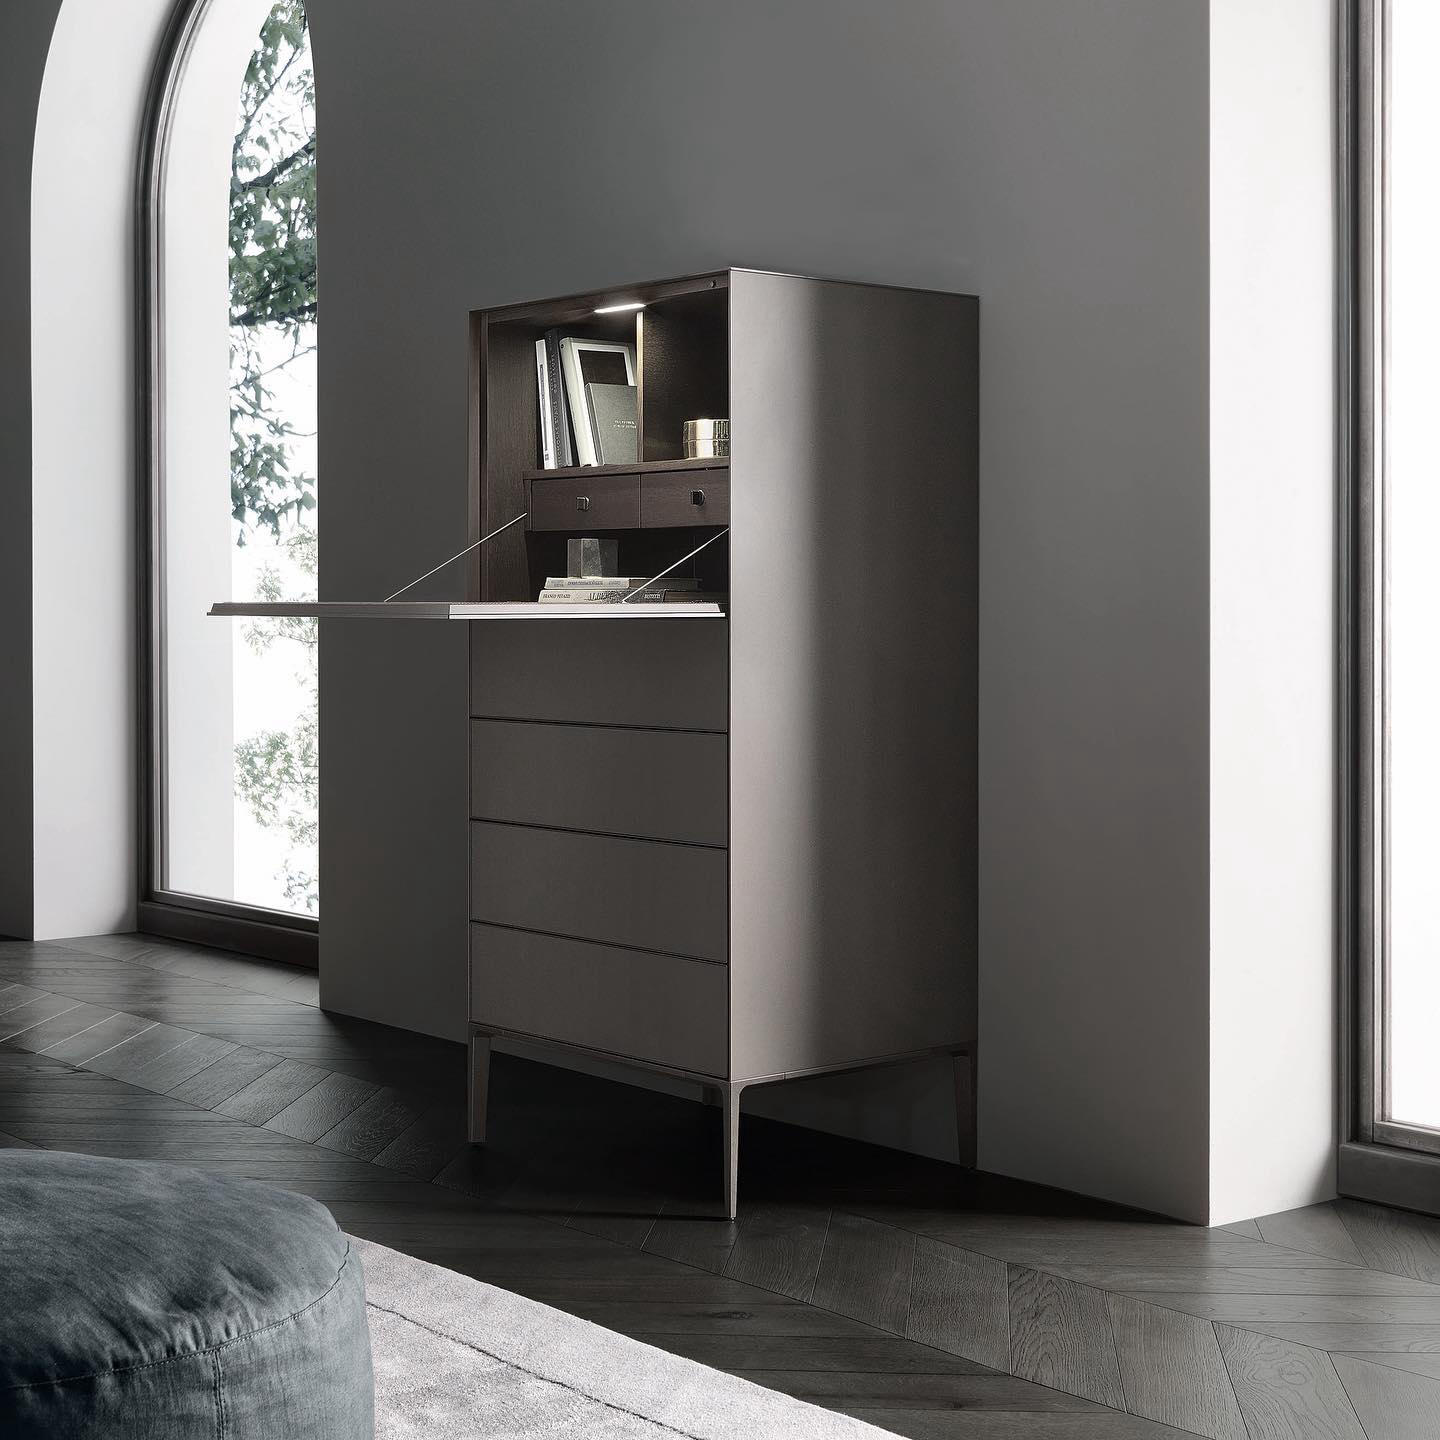 Pure Interiors - Self Up Writing Desk from Rimadesio